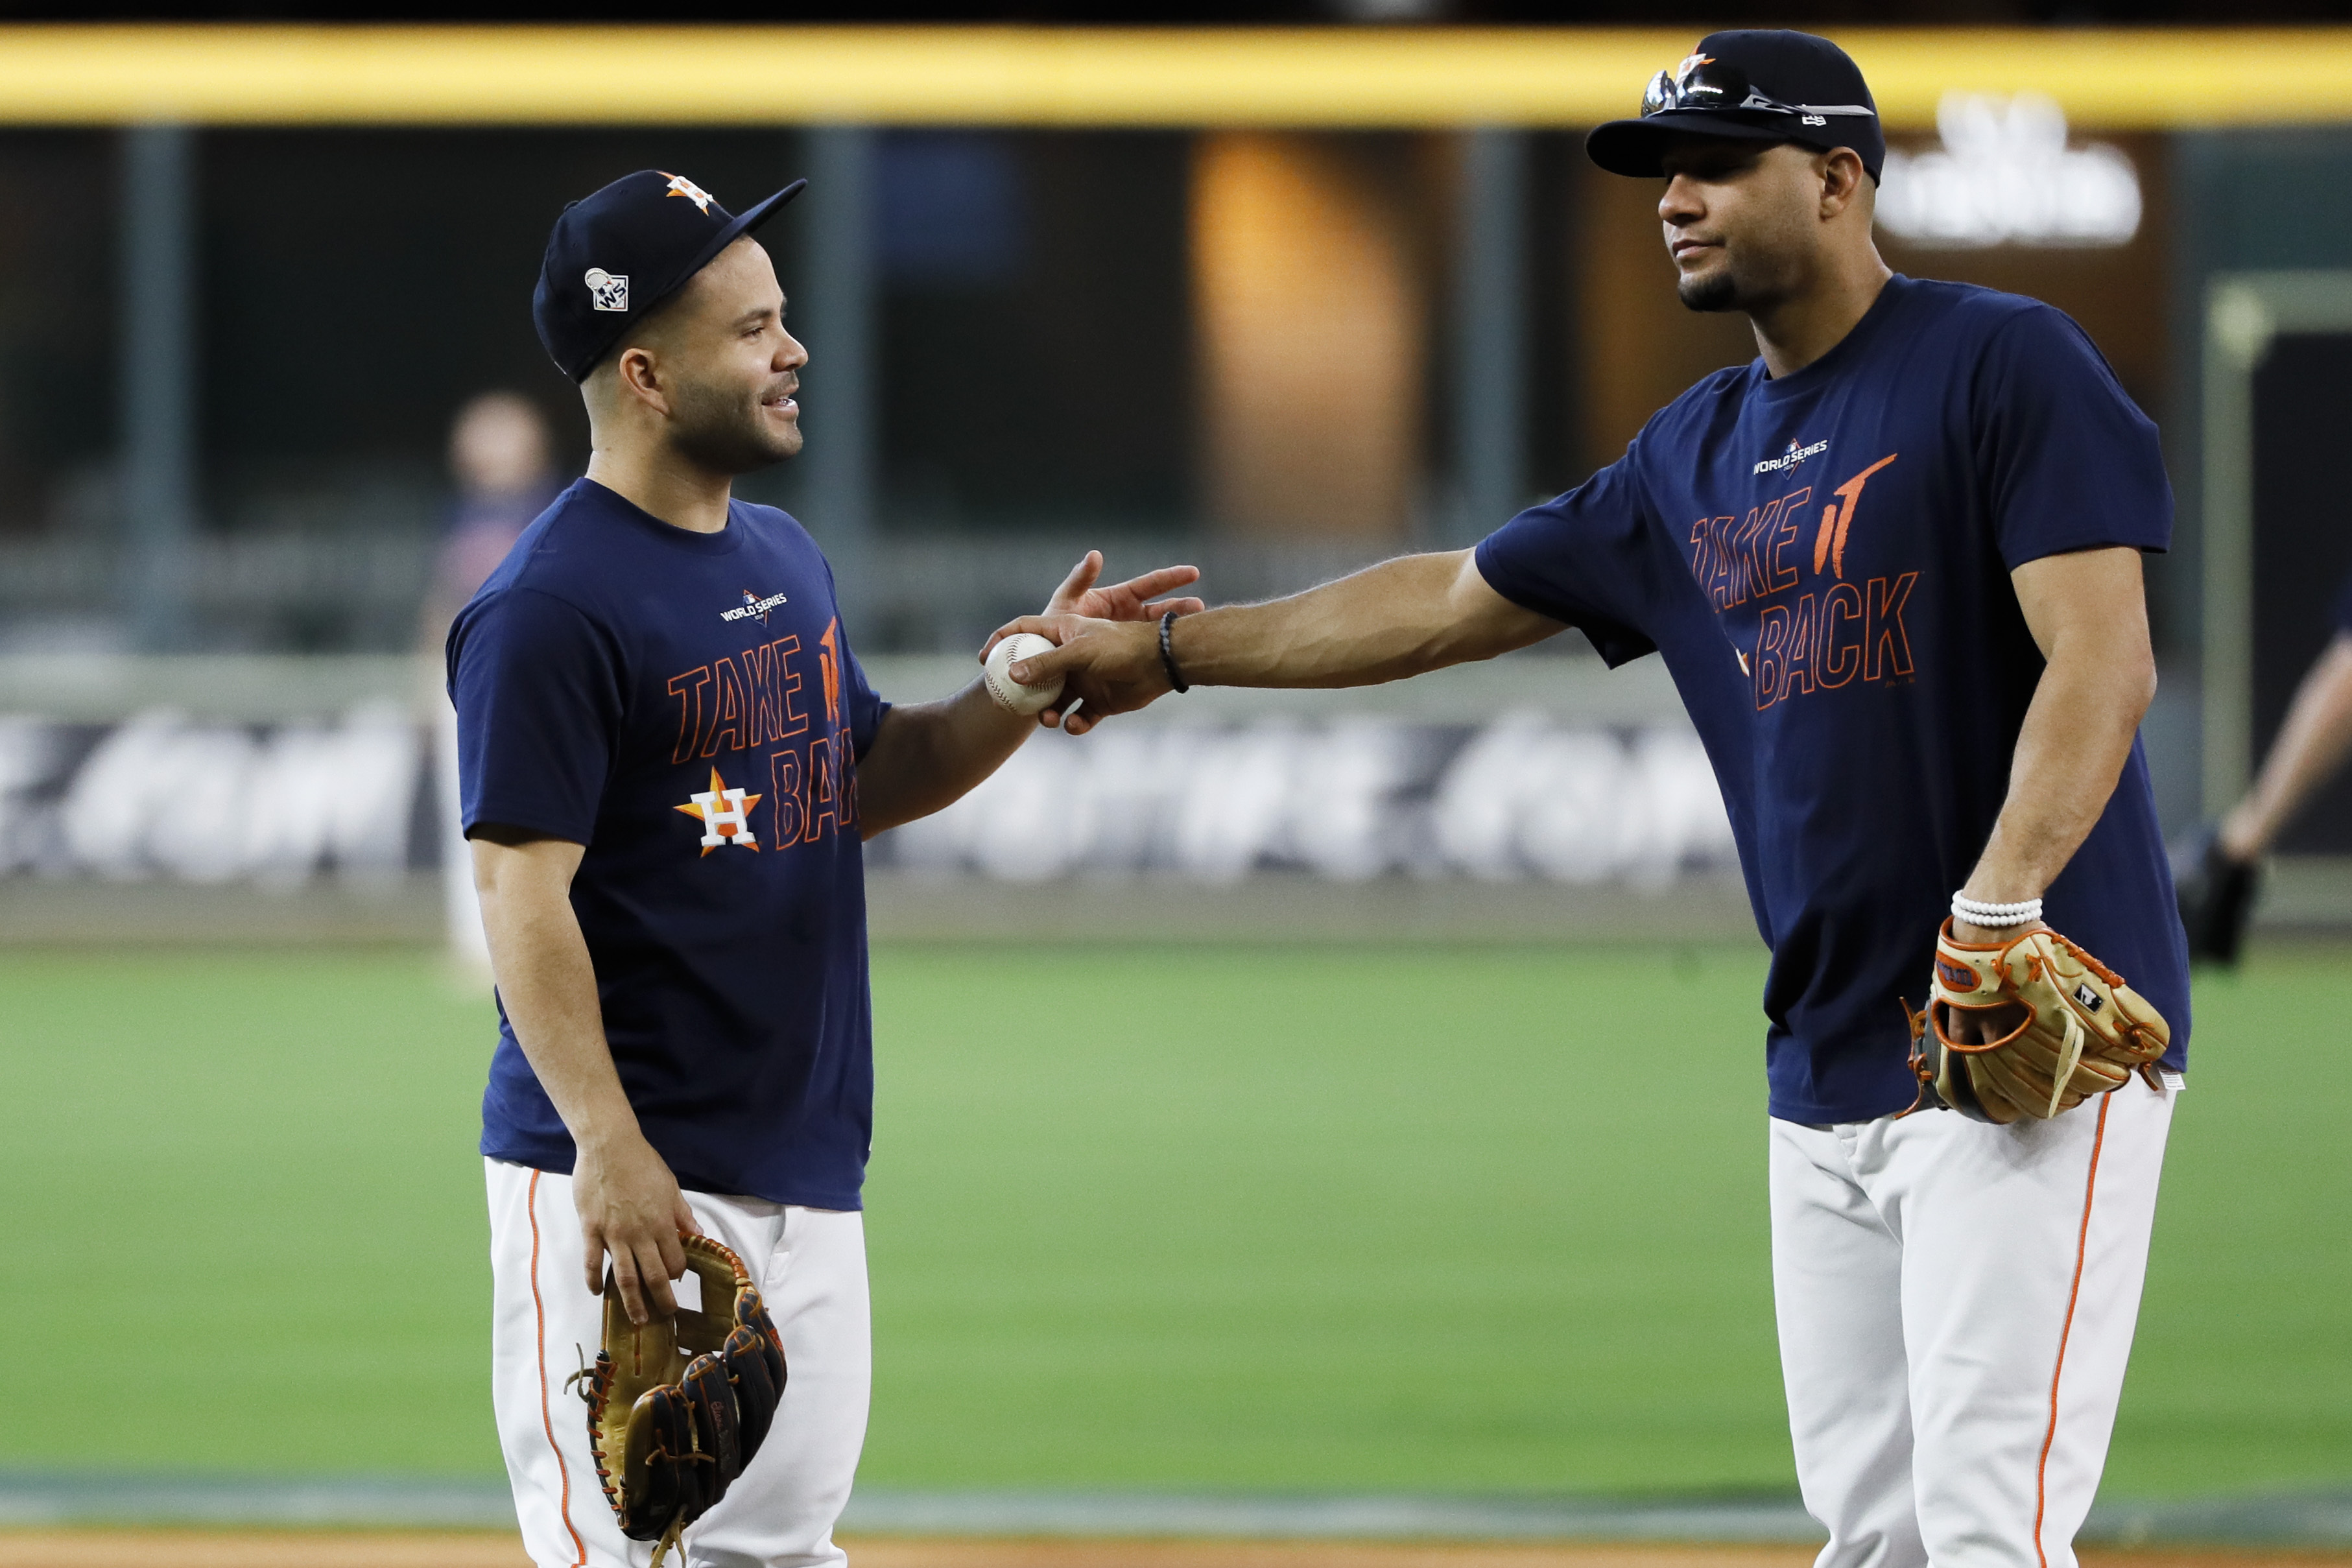 Jose Altuve Primed to lead the Astros in the 2022 World Series